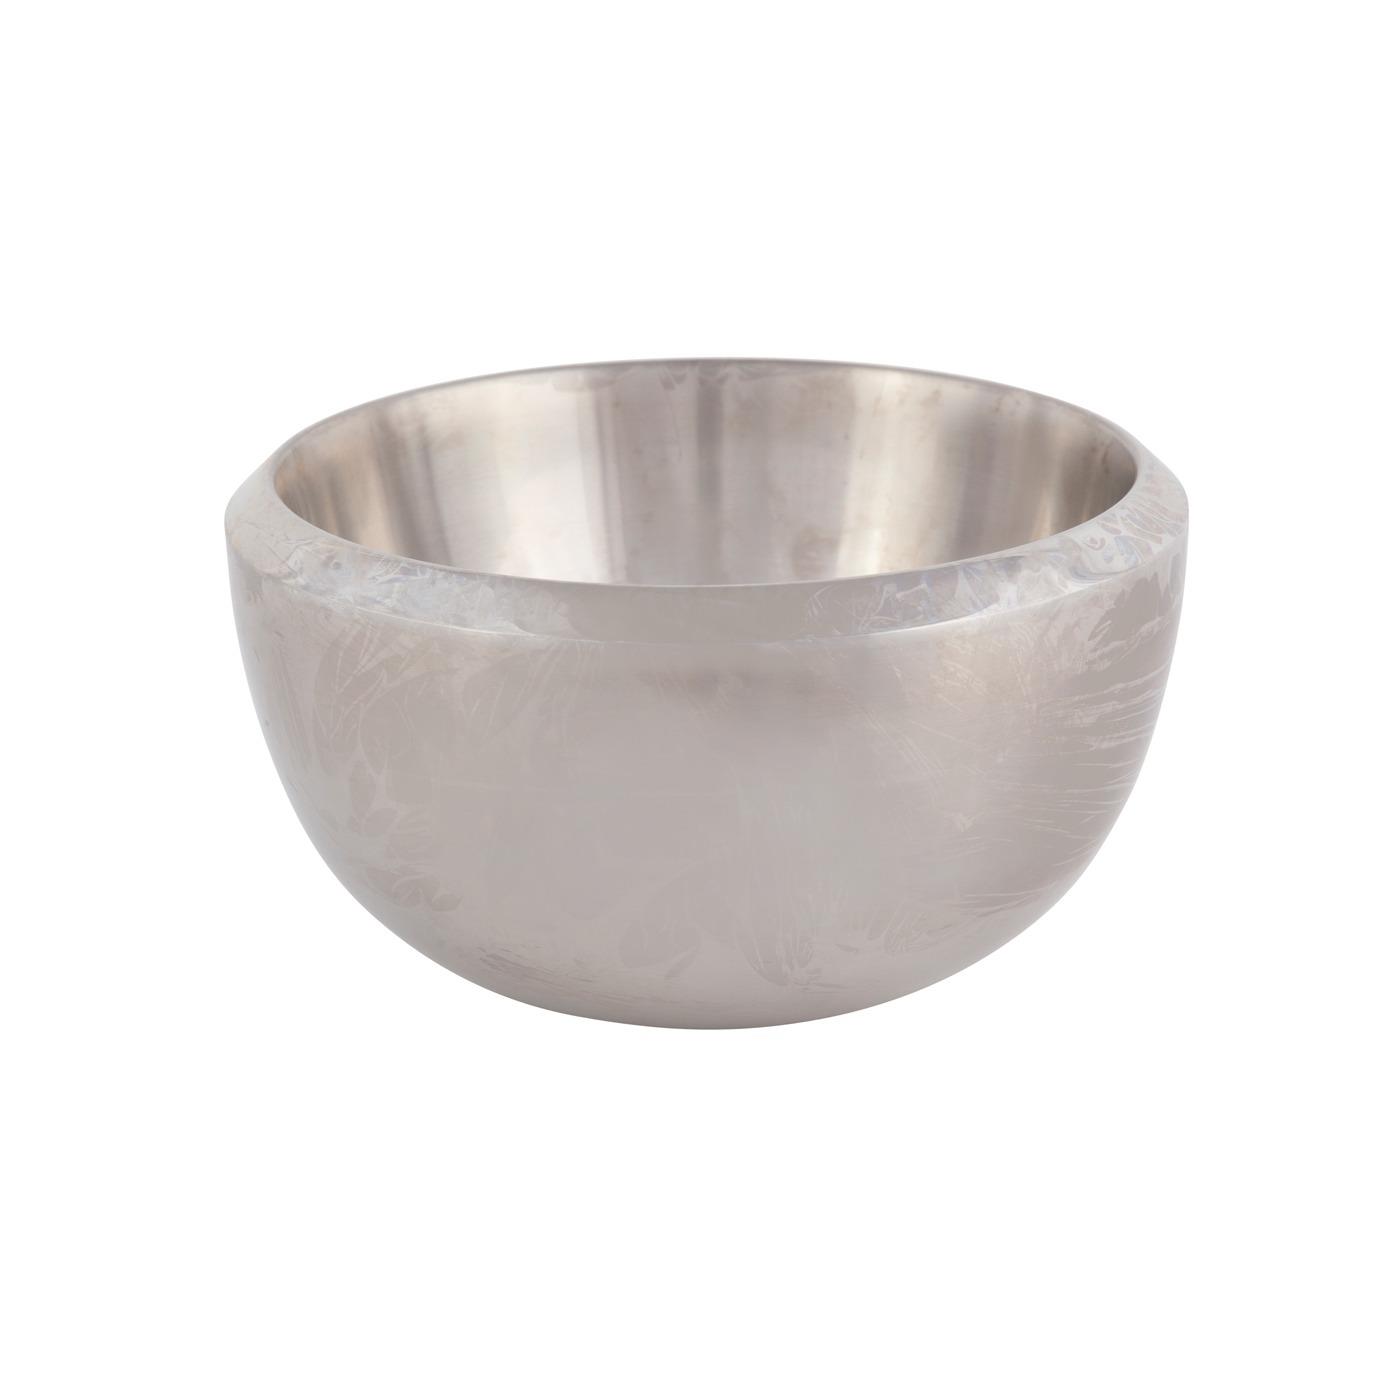 Stainless Steel Round DW Bowl - 8"